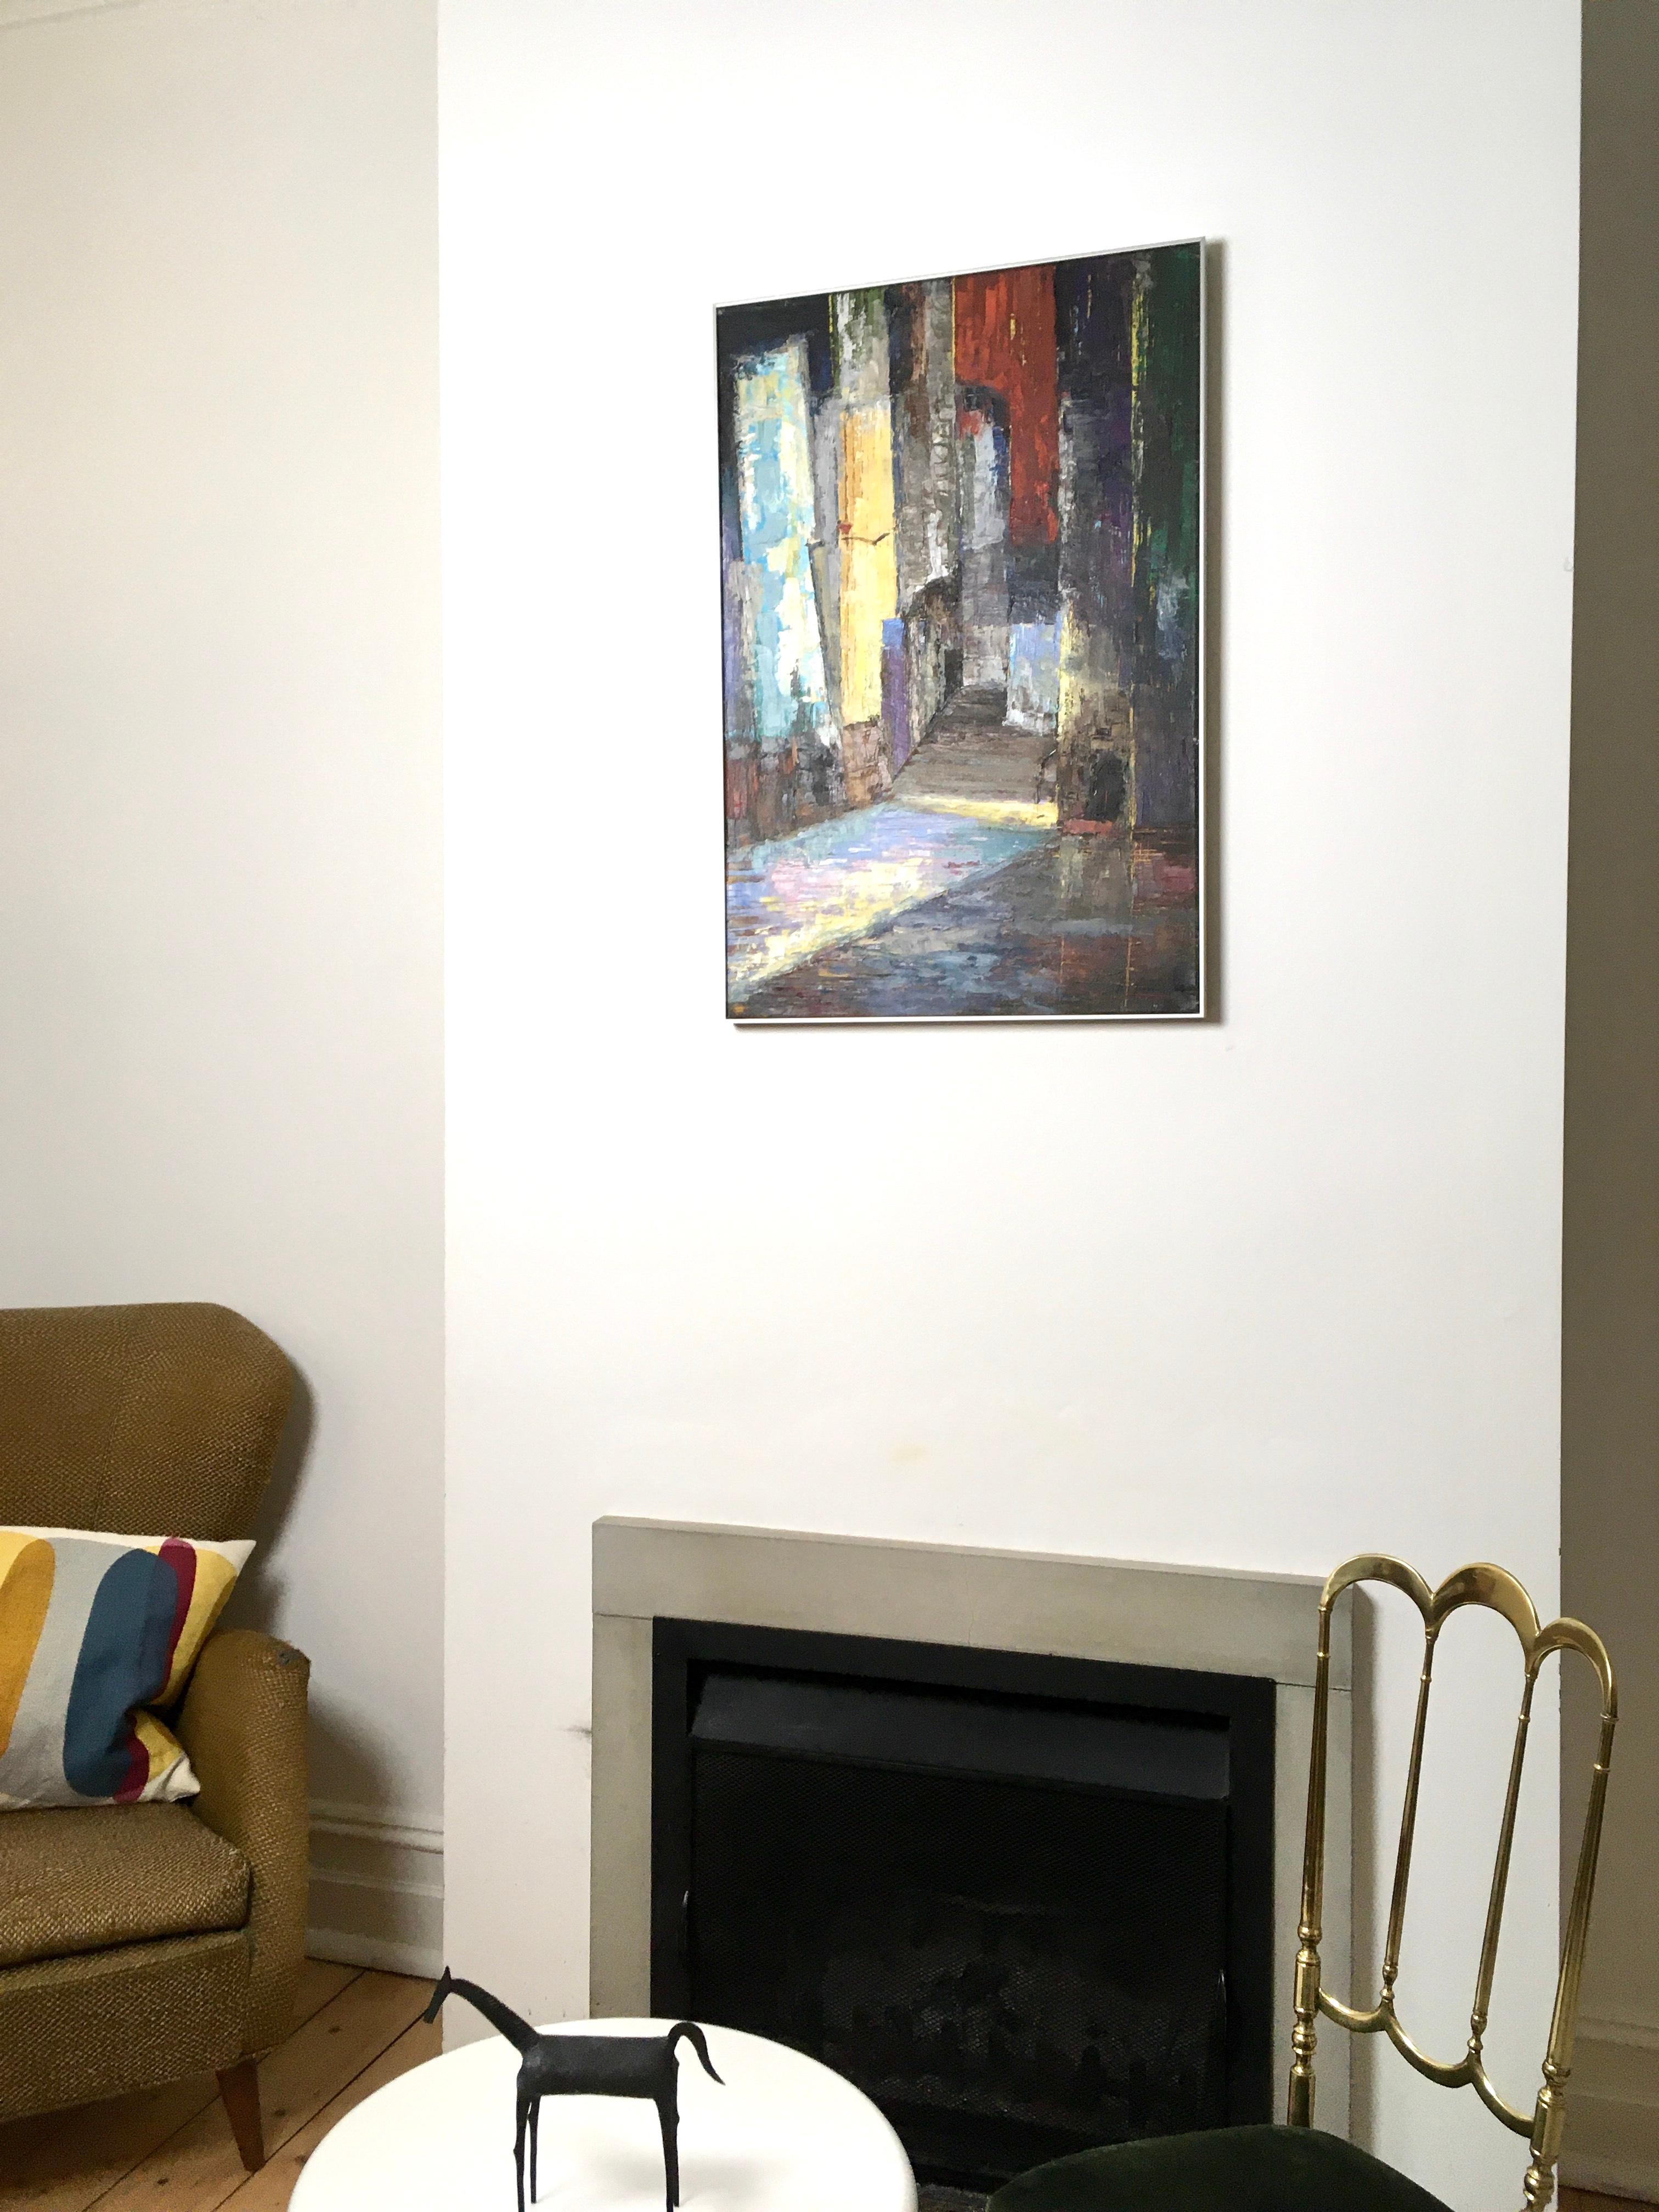 A wonderful modernist impasto oil painting by E. Francisco, dating from the mid-1970s, featuring excellent colour and texture. In great condition and one of those paintings that will grow on you, as it has done on us. 

We love it for the rough